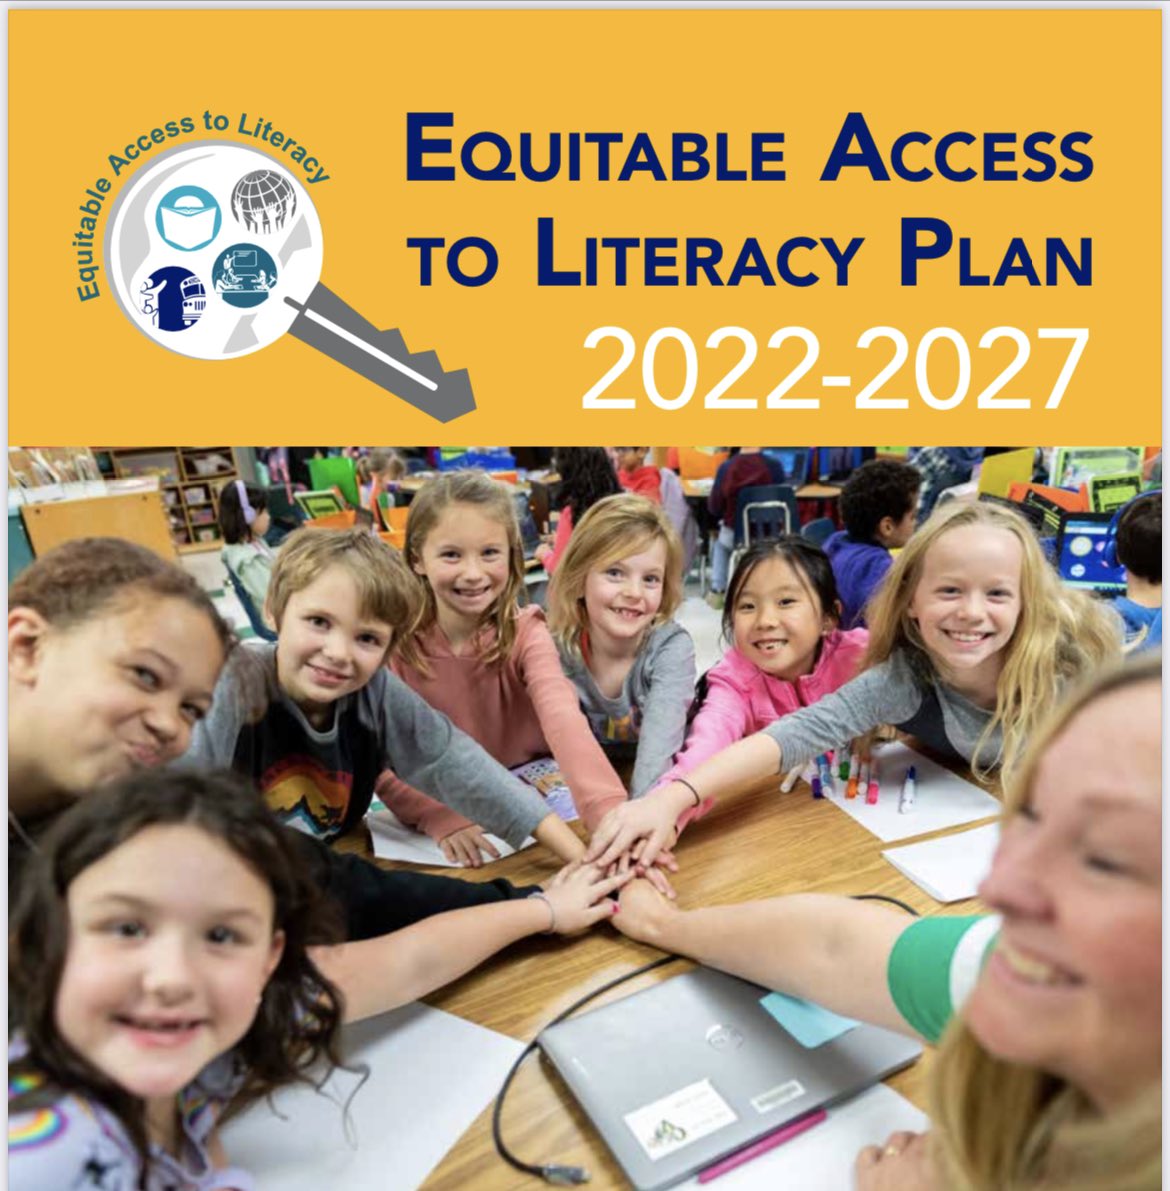 Grateful that the FCPS @ealfcps plan highlights Professional Learning and Coaching practices to support culturally responsive curriculum and instruction aligned to the Science-Based Reading Research. Because we know, “students learn what teachers understand.” -I.F.